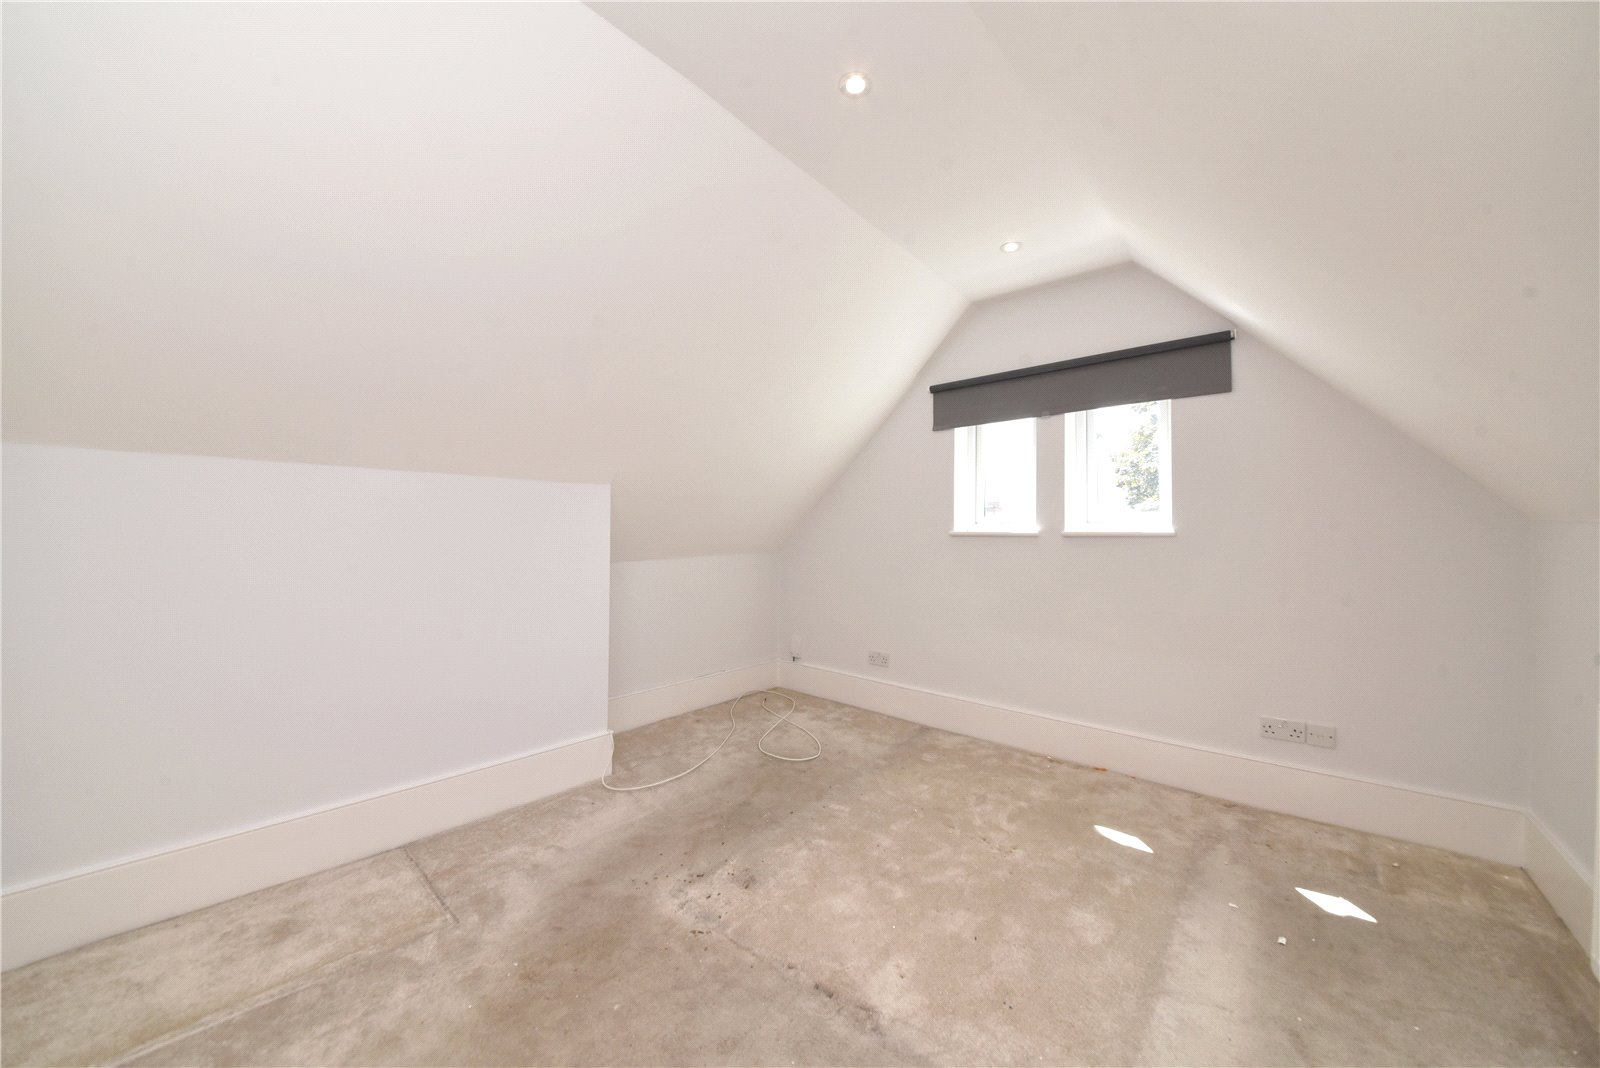 1 bed apartment to rent in Whitchurch Lane, Edgware  - Property Image 4